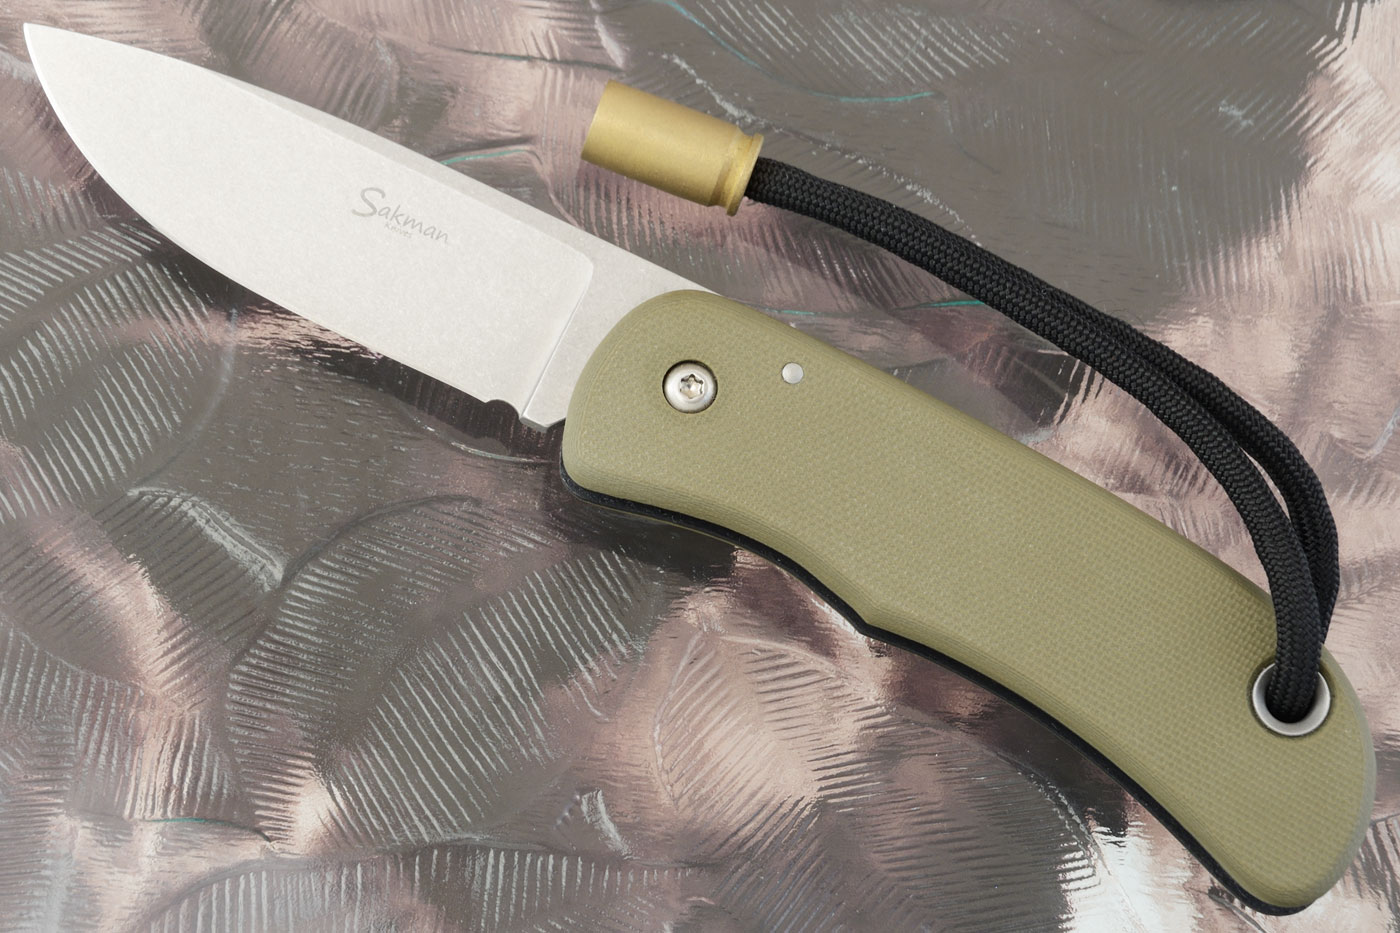 Pointer Friction Folder with OD Green and Black G10